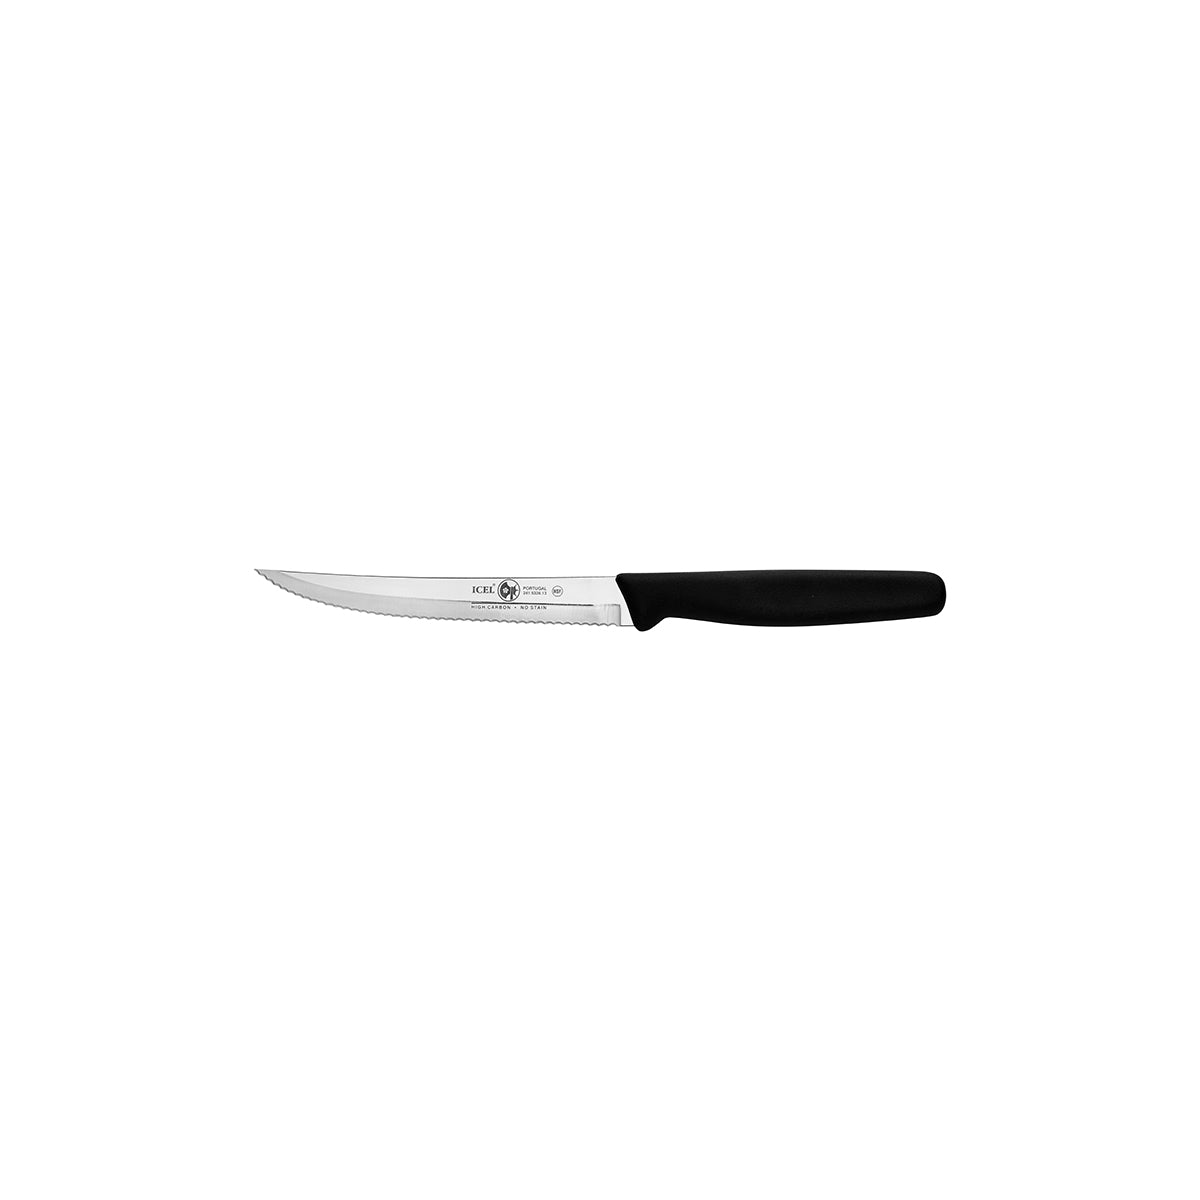 Grapefruit Knife - 80Mm (Ig7208.08) from Icel. Sold in boxes of 1. Hospitality quality at wholesale price with The Flying Fork! 